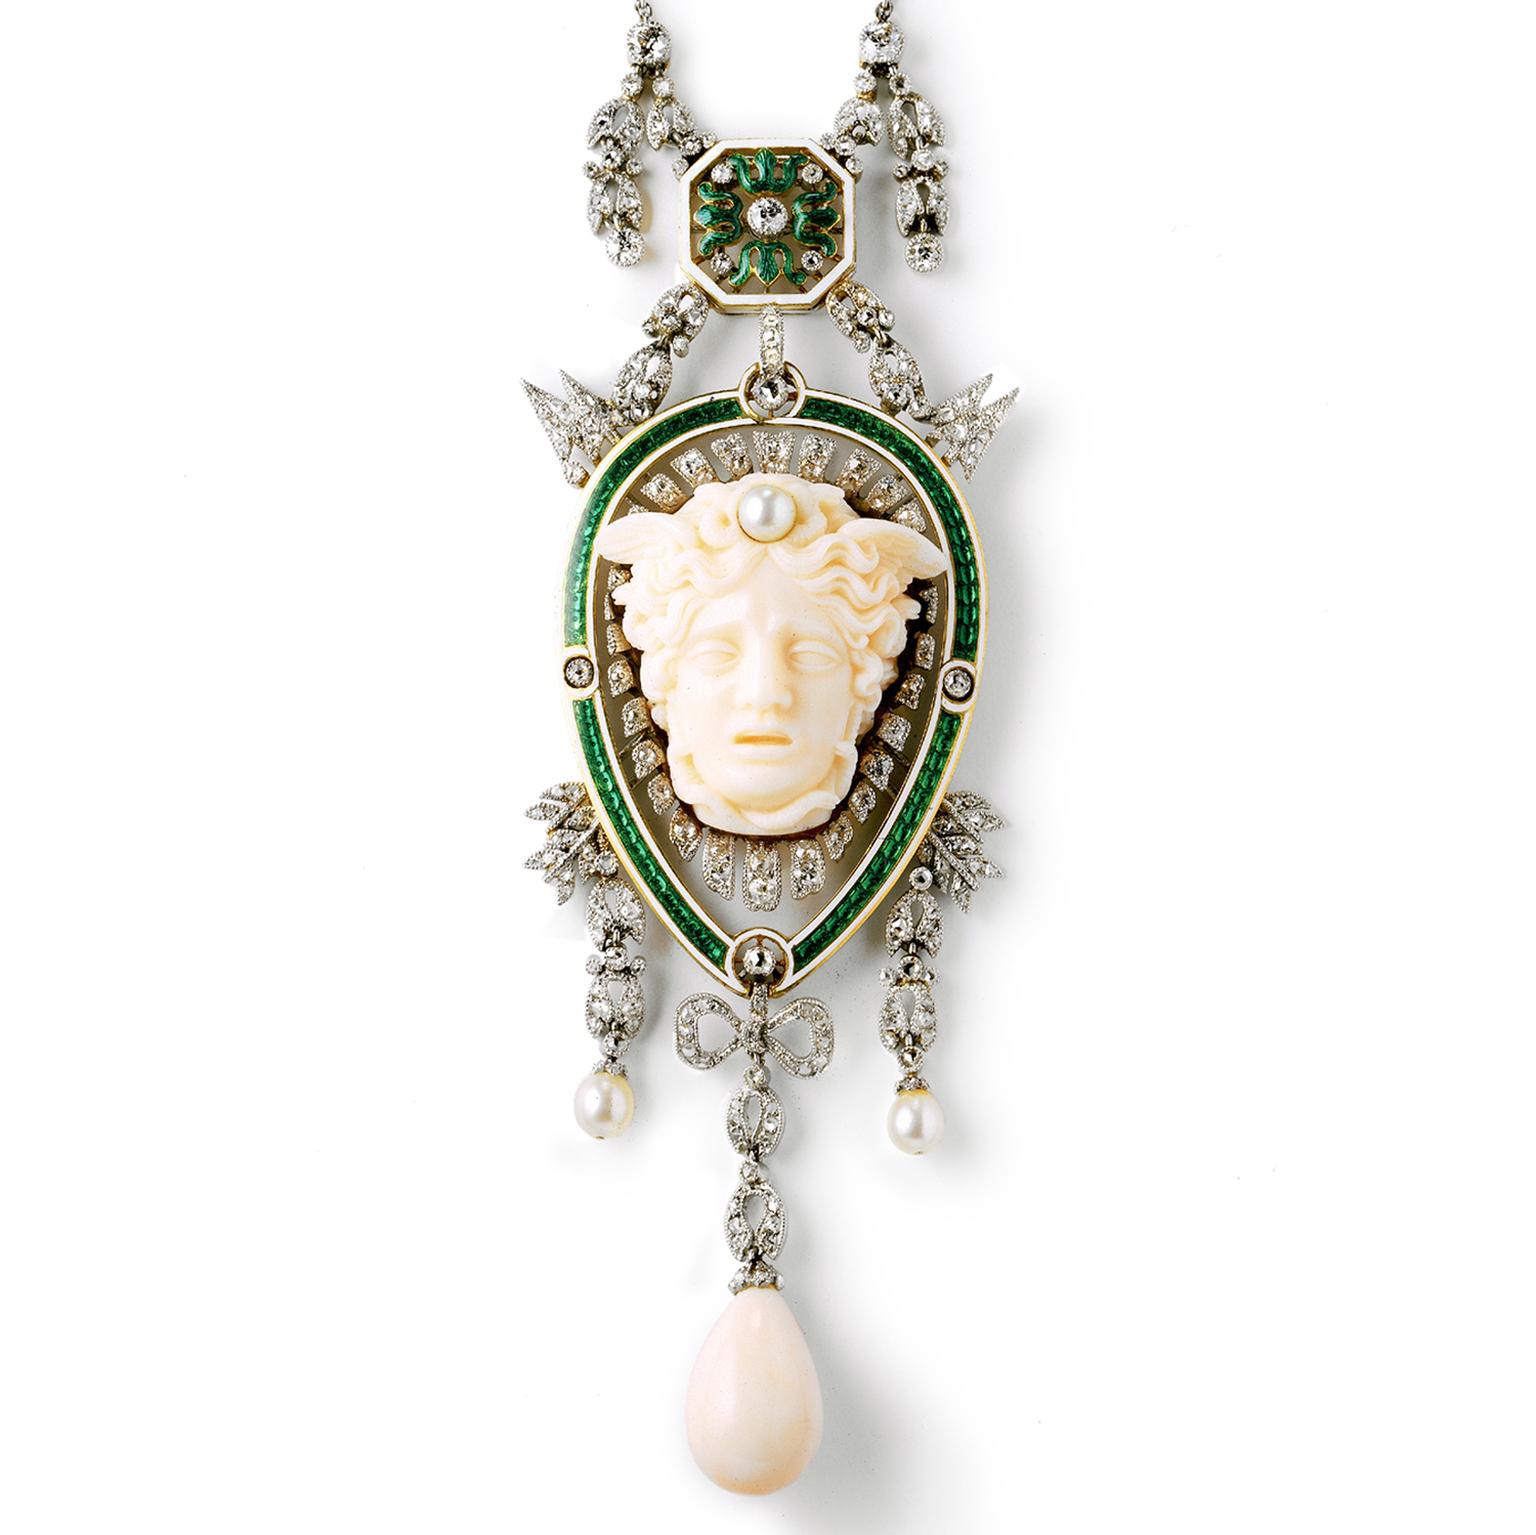 Head of Medusa pendant dating from 1906, from the Cartier Collection